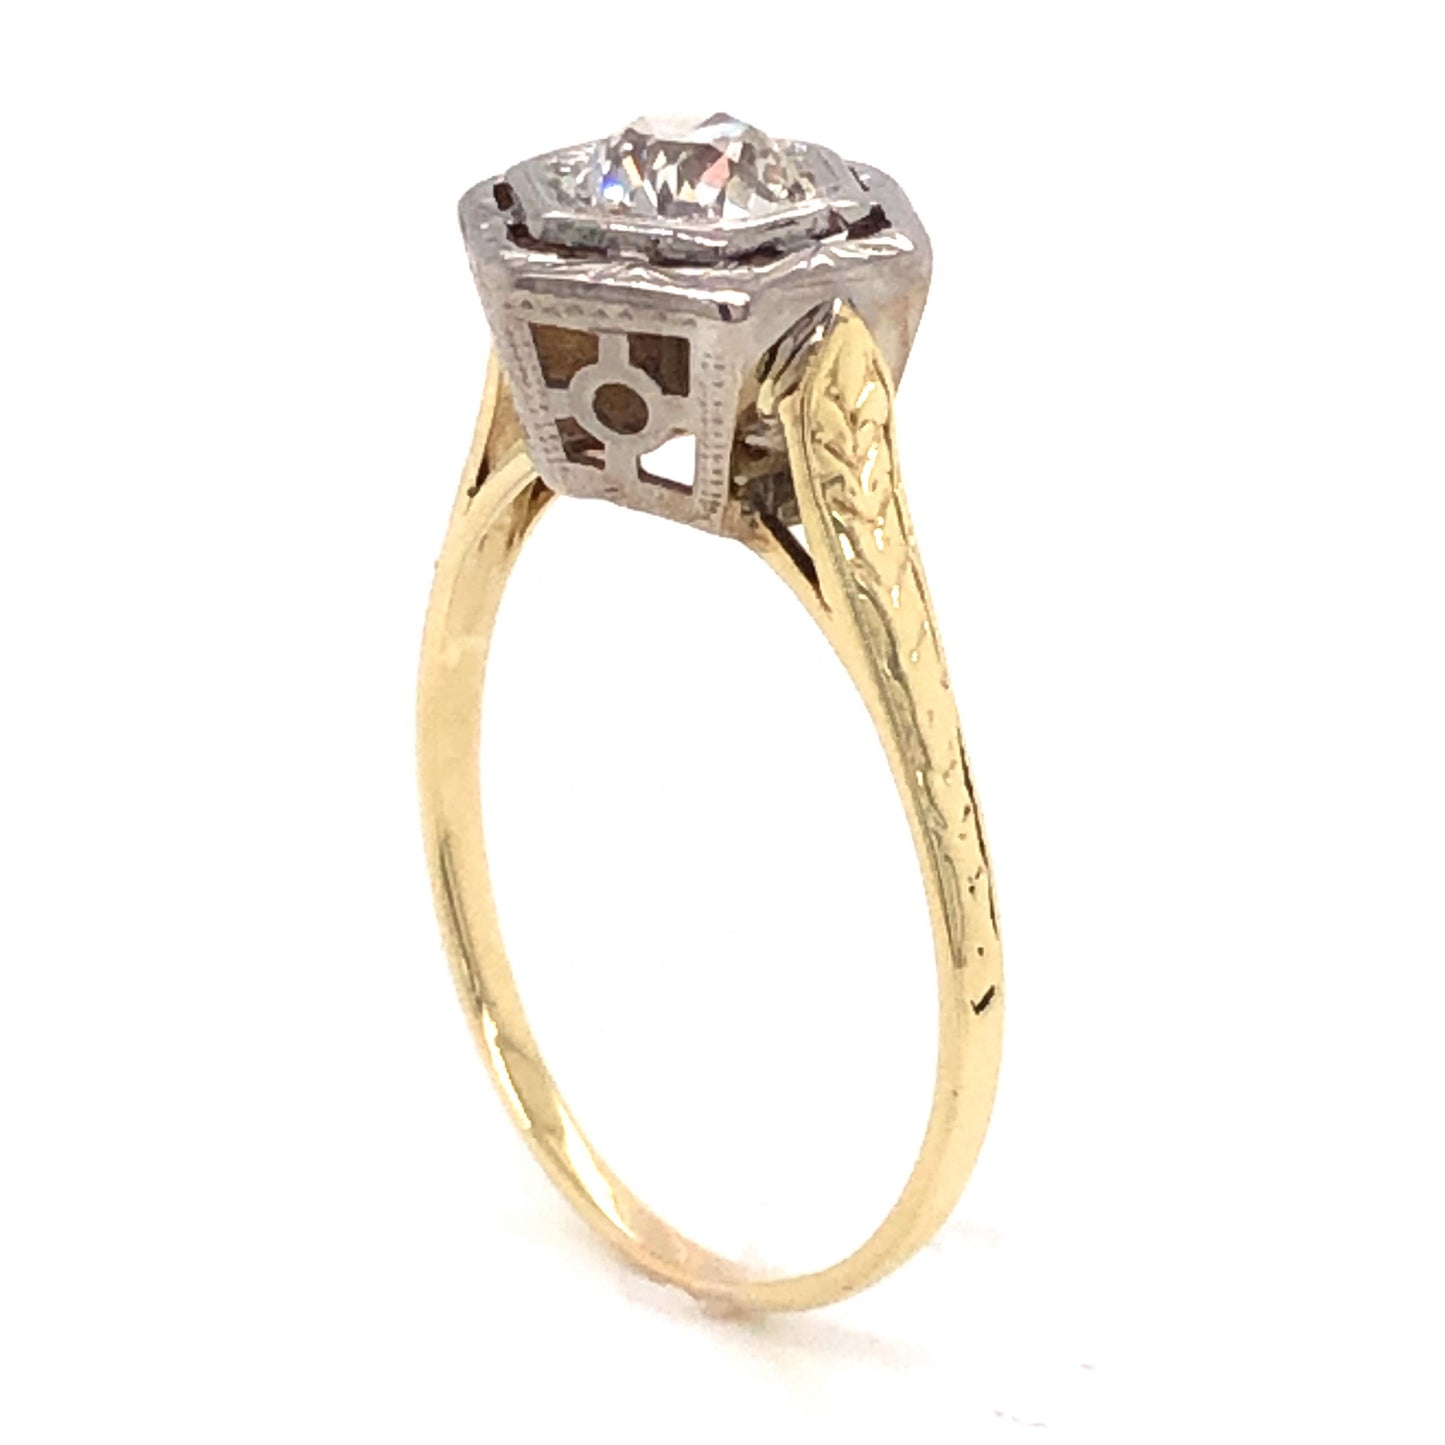 .72 Art Deco Two-Tone Diamond Engagement Ring in 14k